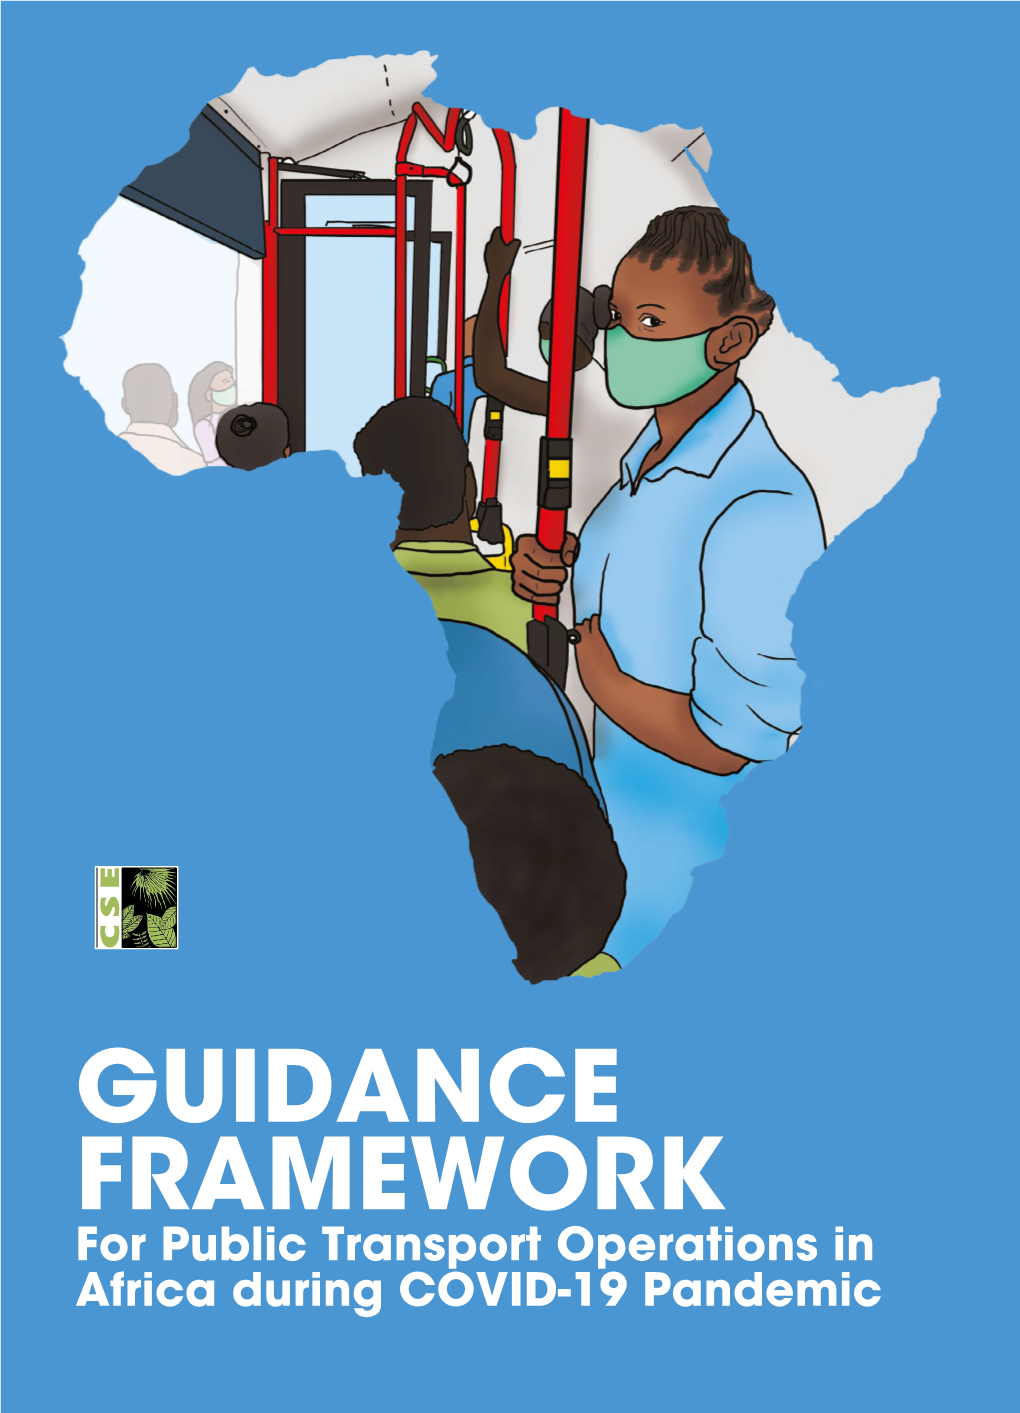 GUIDANCE FRAMEWORK for Public Transport Operations in Africa During COVID-19 Pandemic